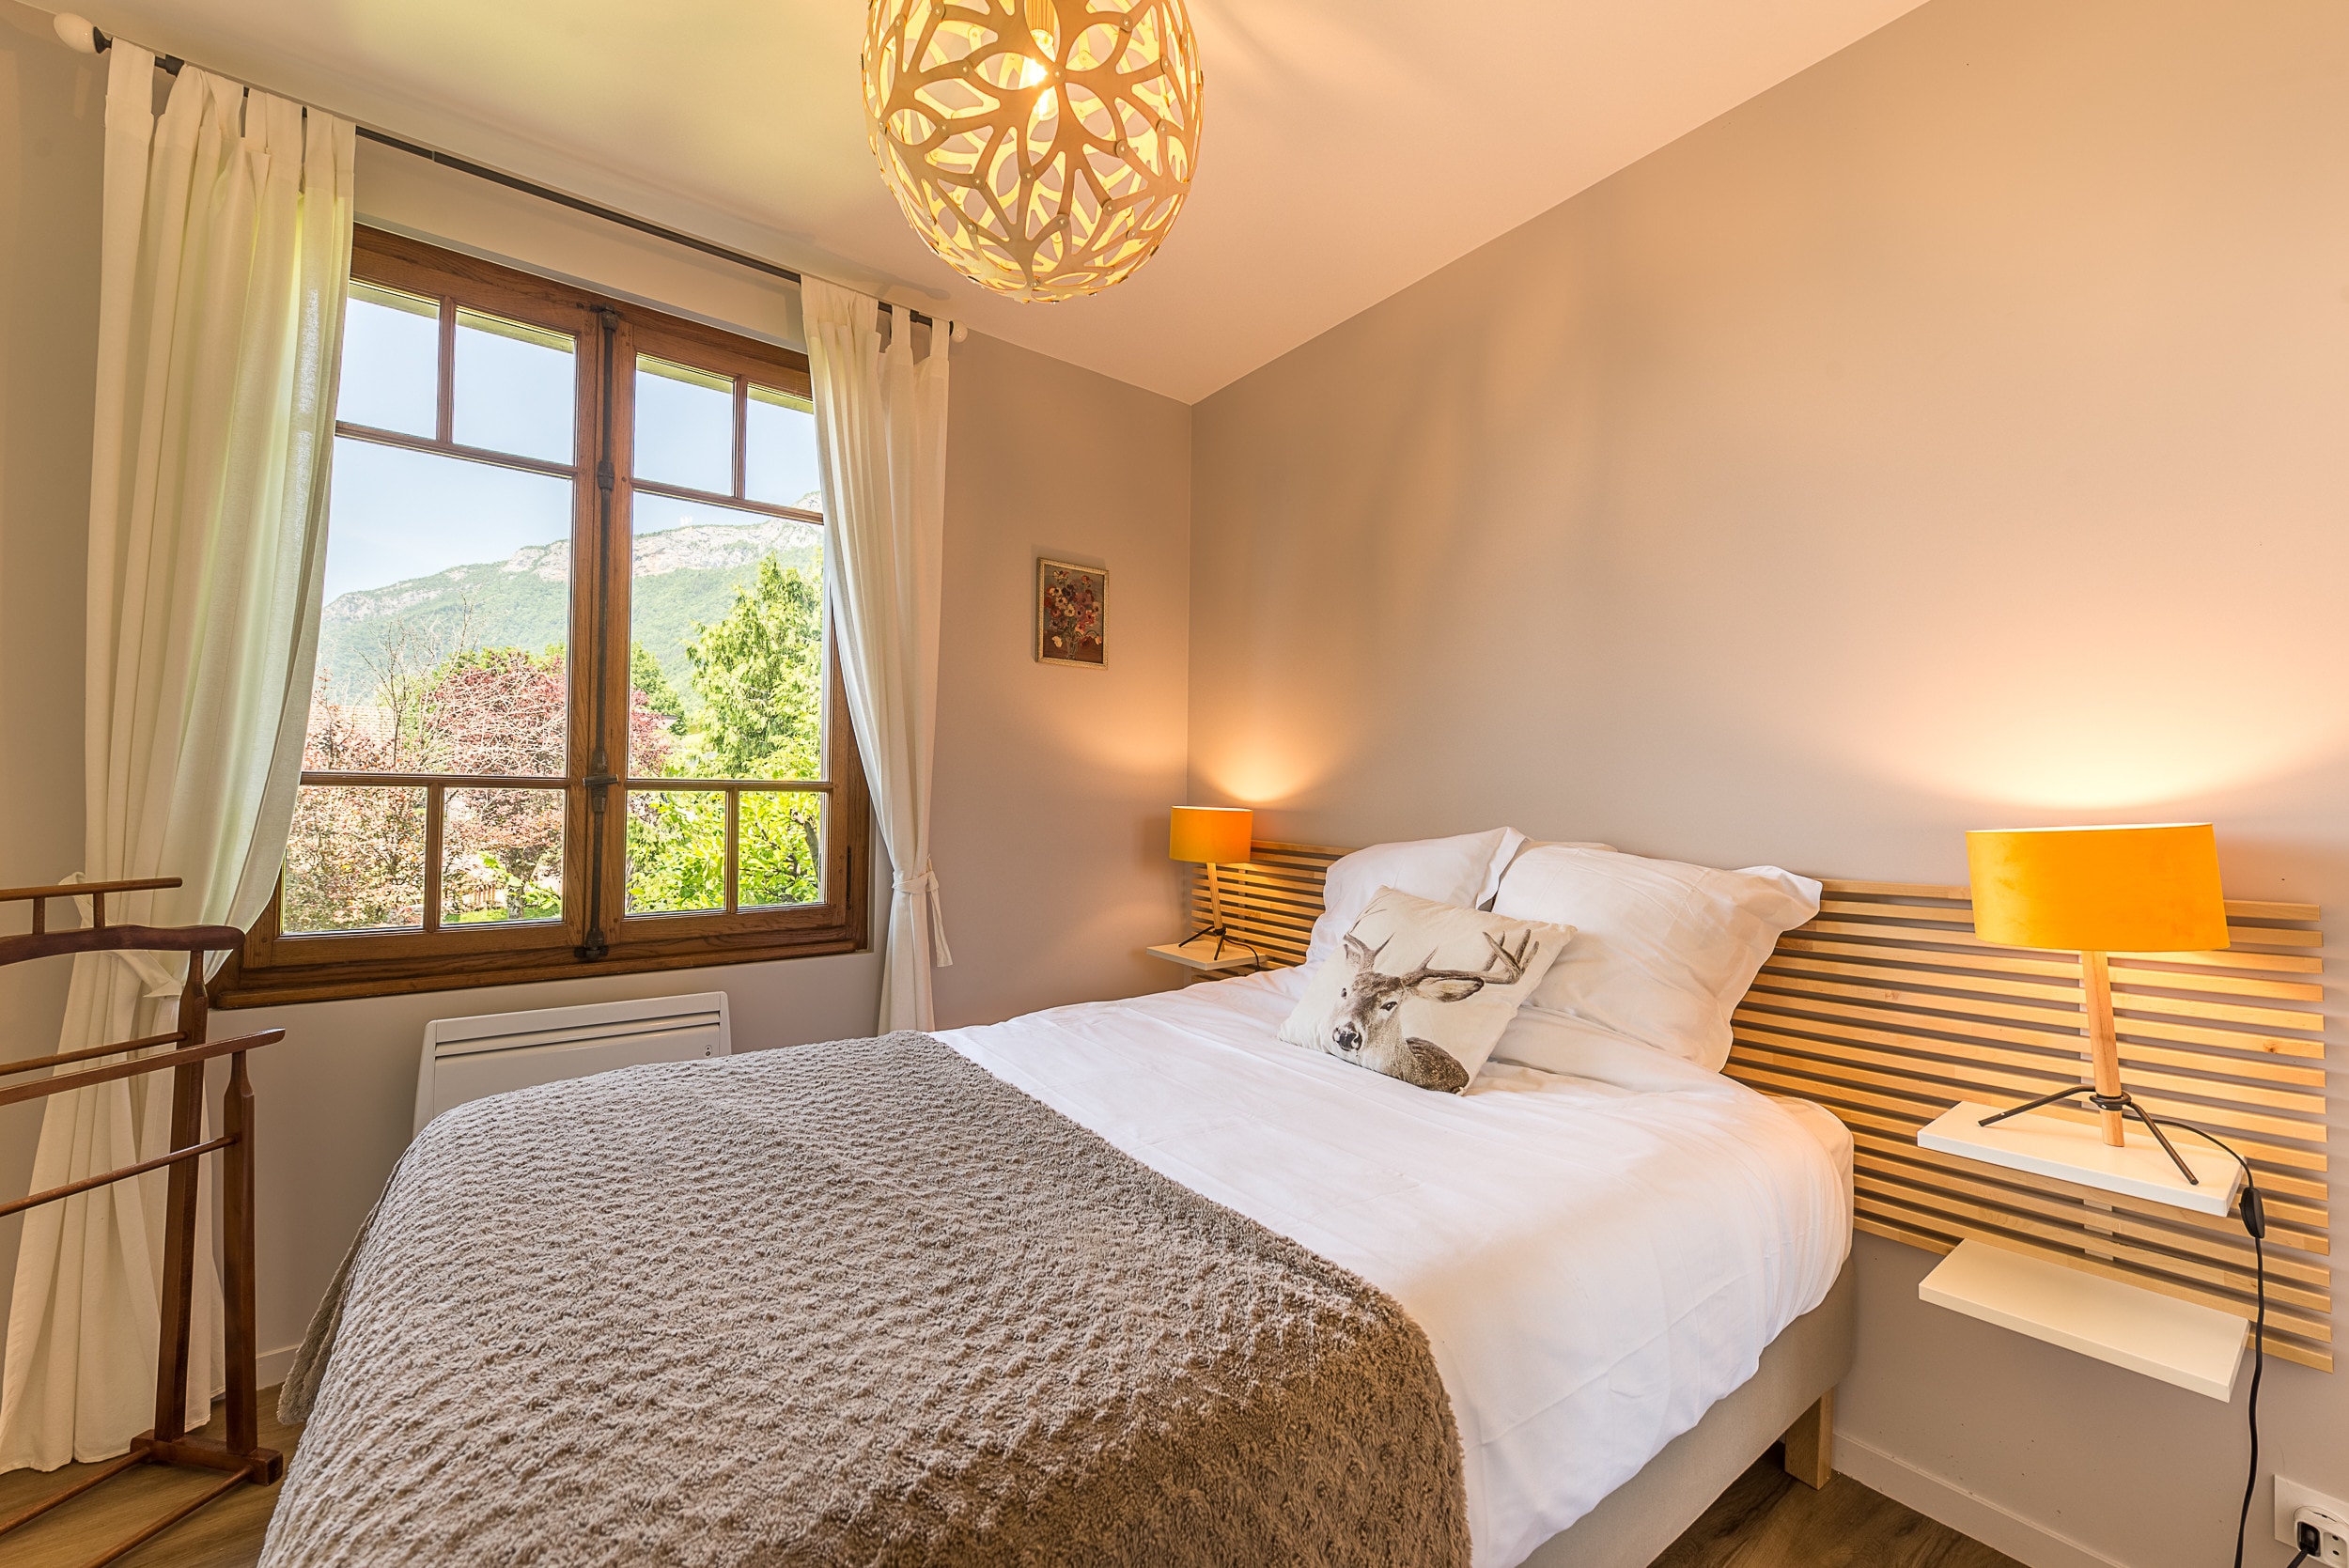 Relax in the refined comfort of our ground-floor double room in Veyrier du Lac. Enjoy a luxurious haven of peace, where the charm of the interior blends harmoniously with the proximity of the surrounding nature. Book now for an exceptional stay.